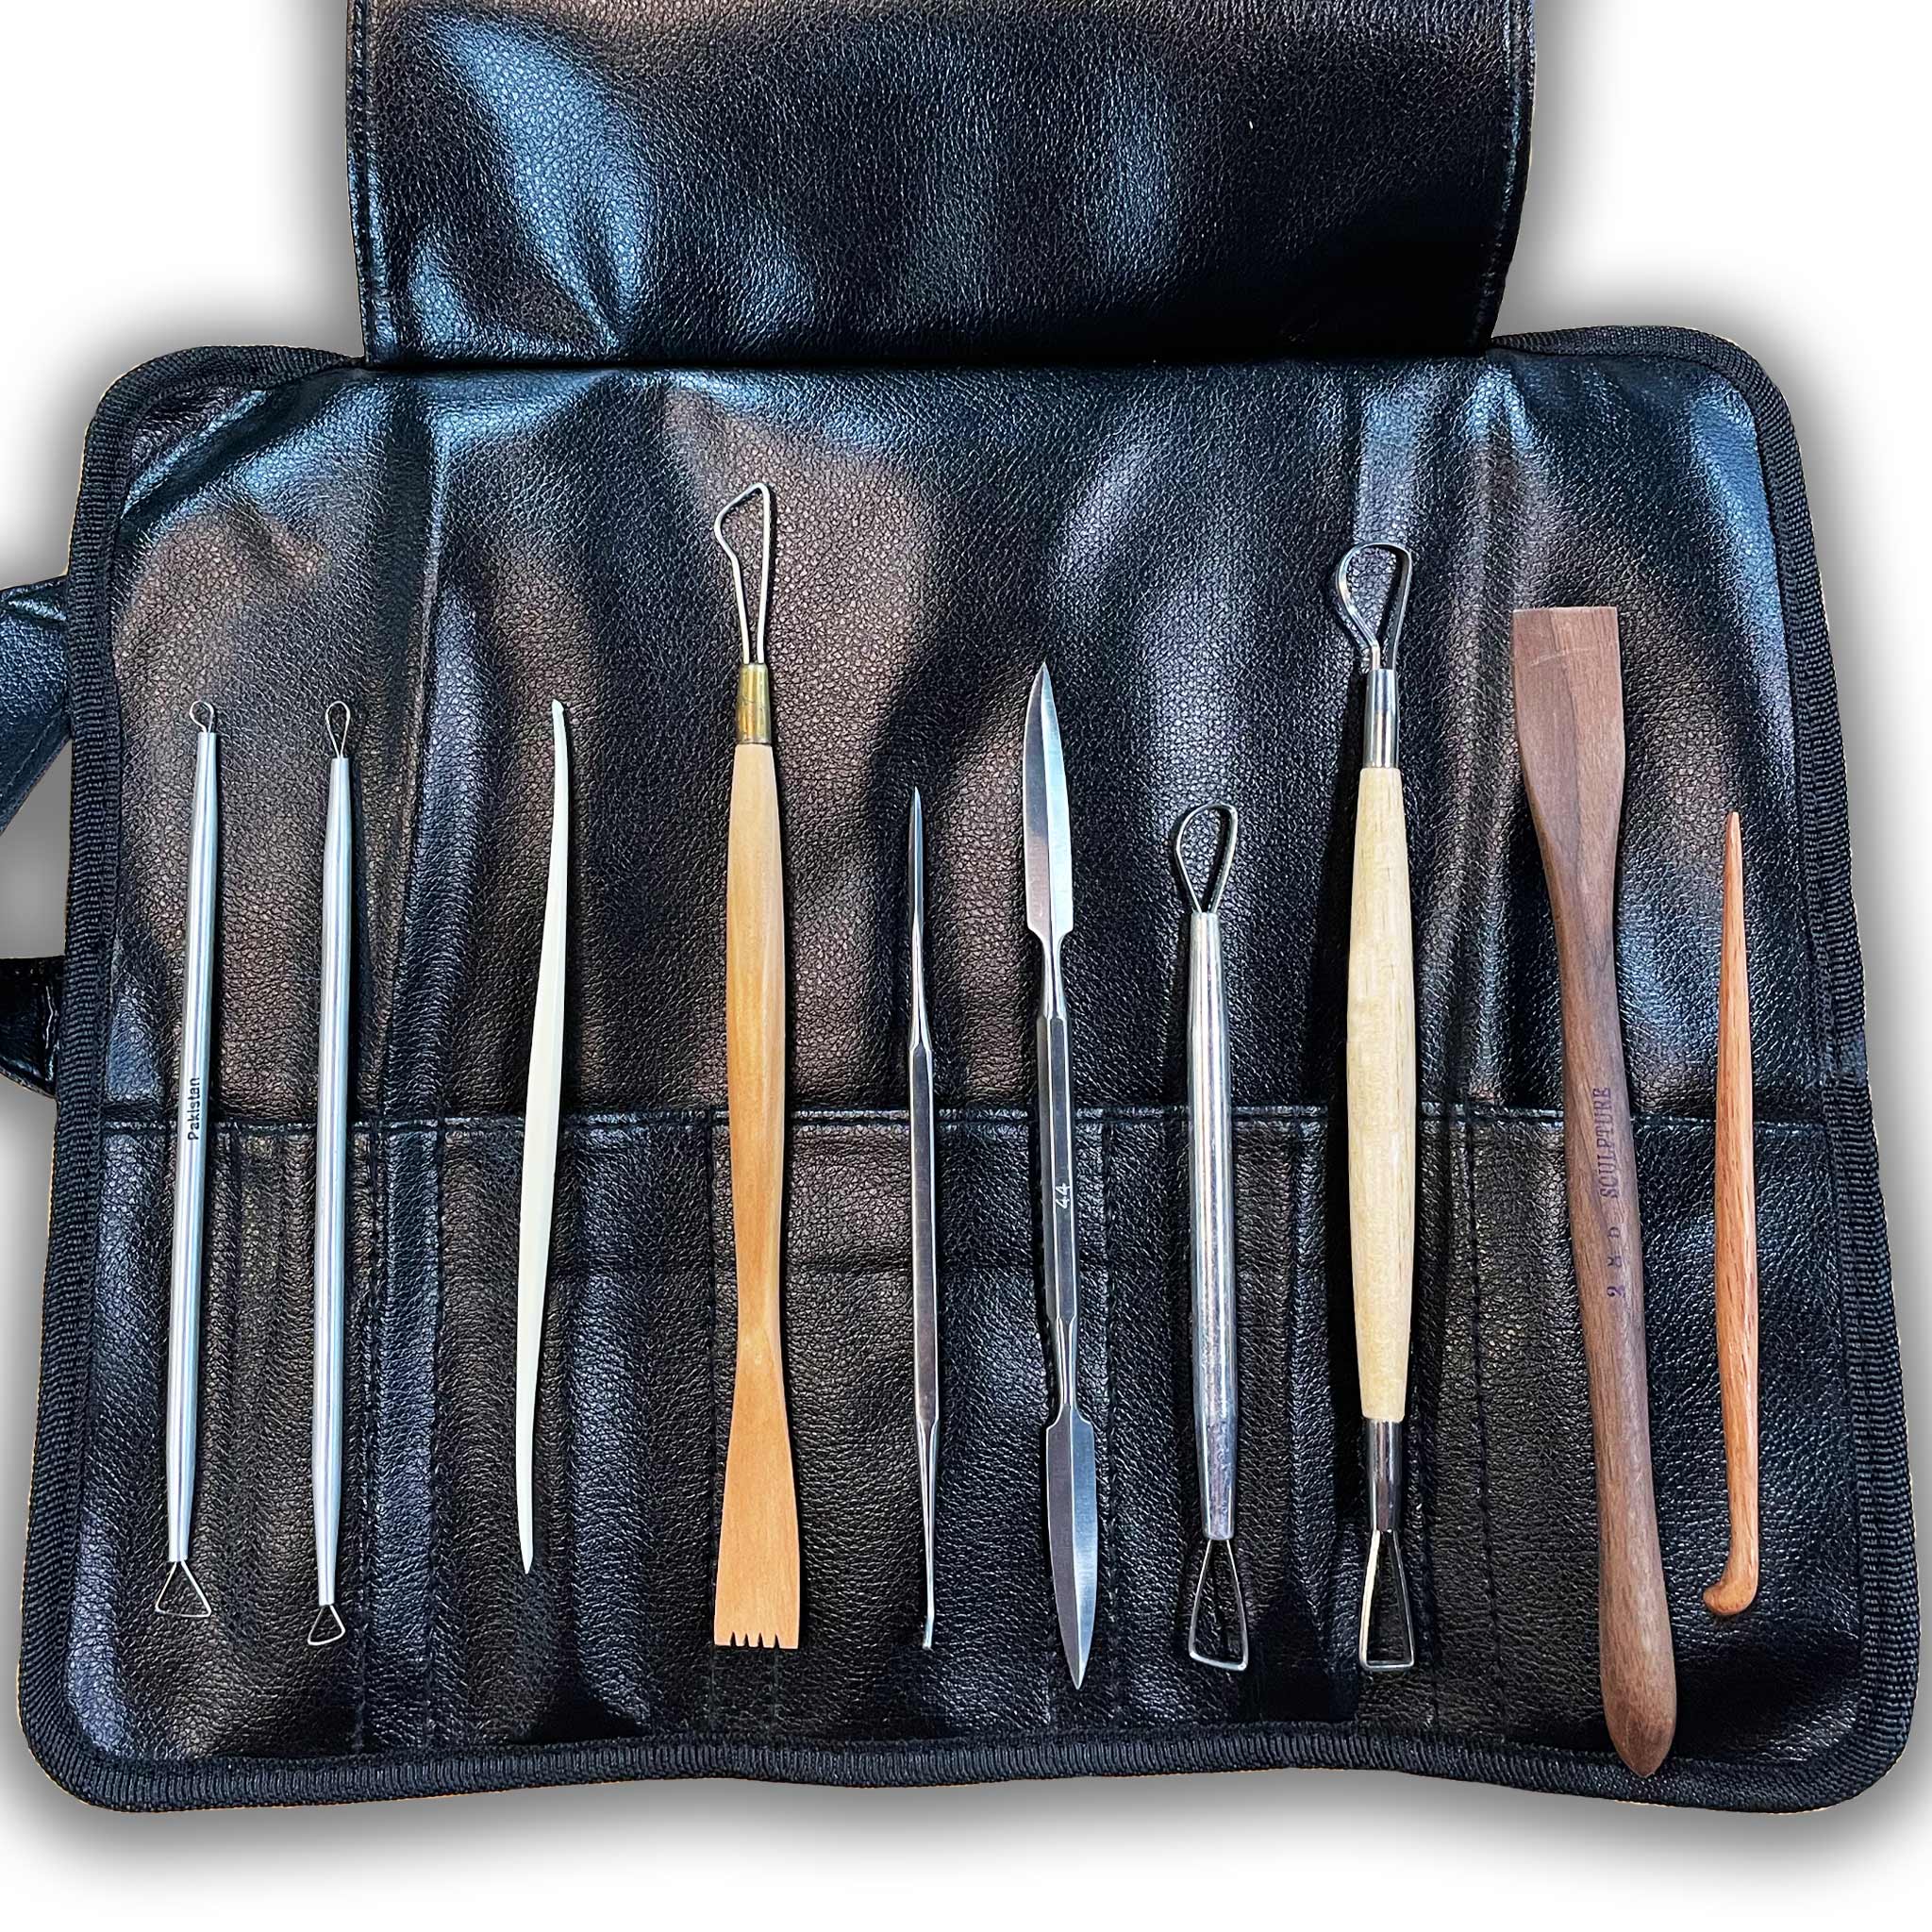 9 Piece Clay Sculpting Tools Set, Plastic Modeling Clay Tools For